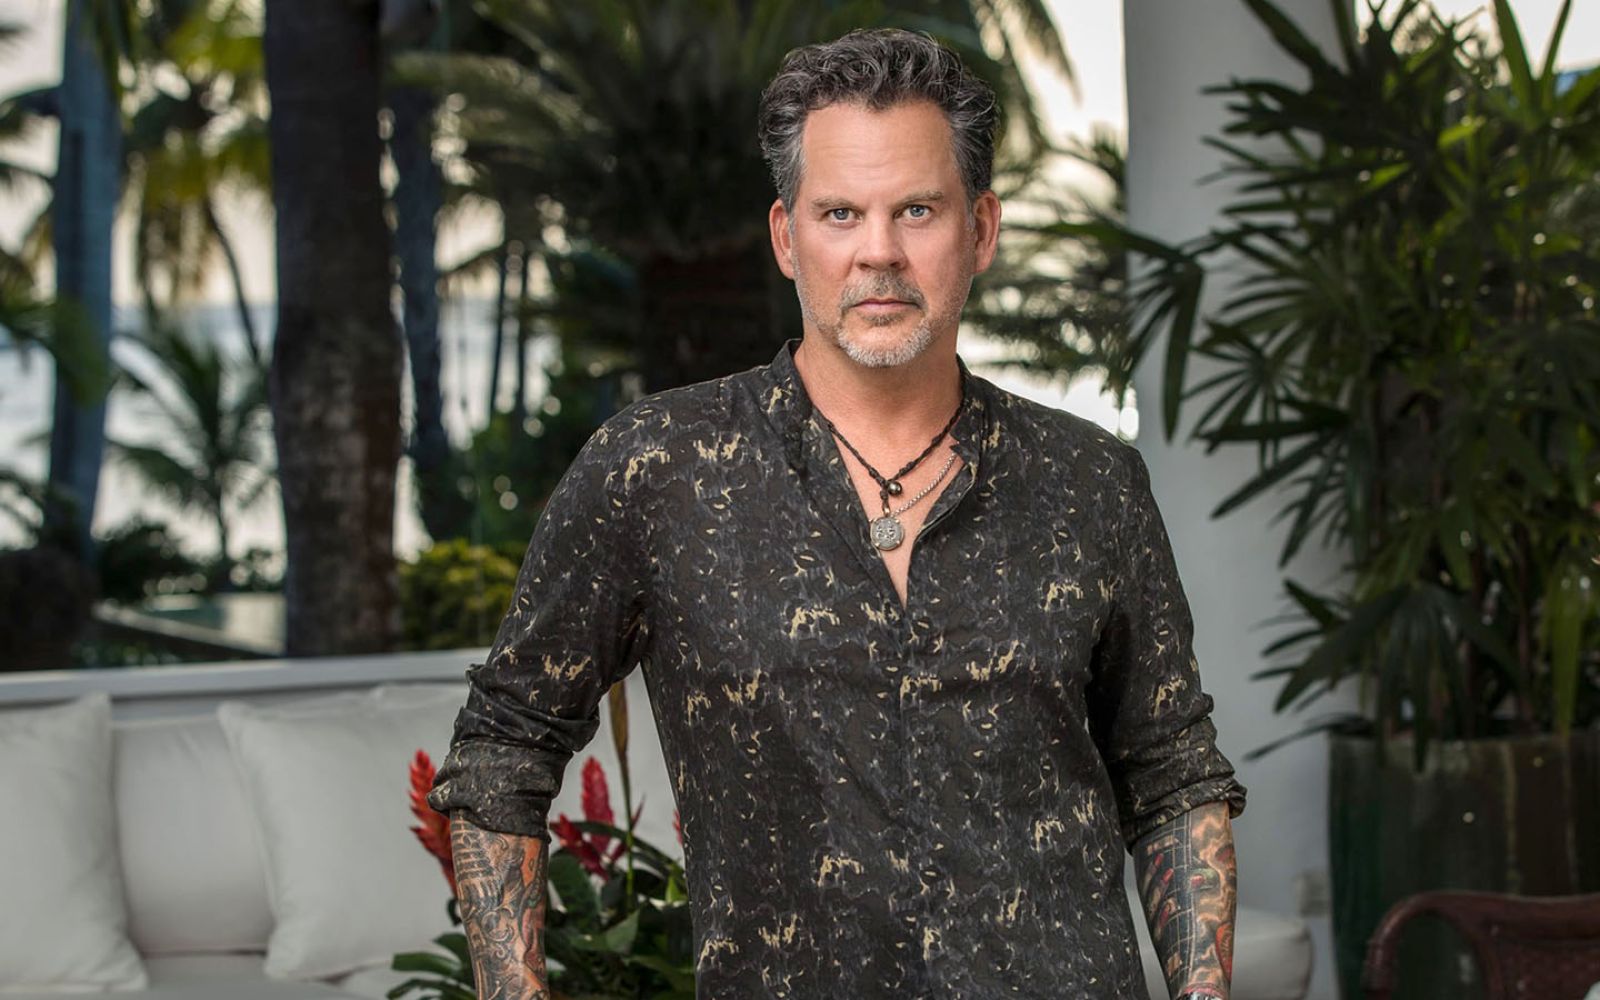 Gary Allan will be at Honeywell Center in Wabash on June 28.